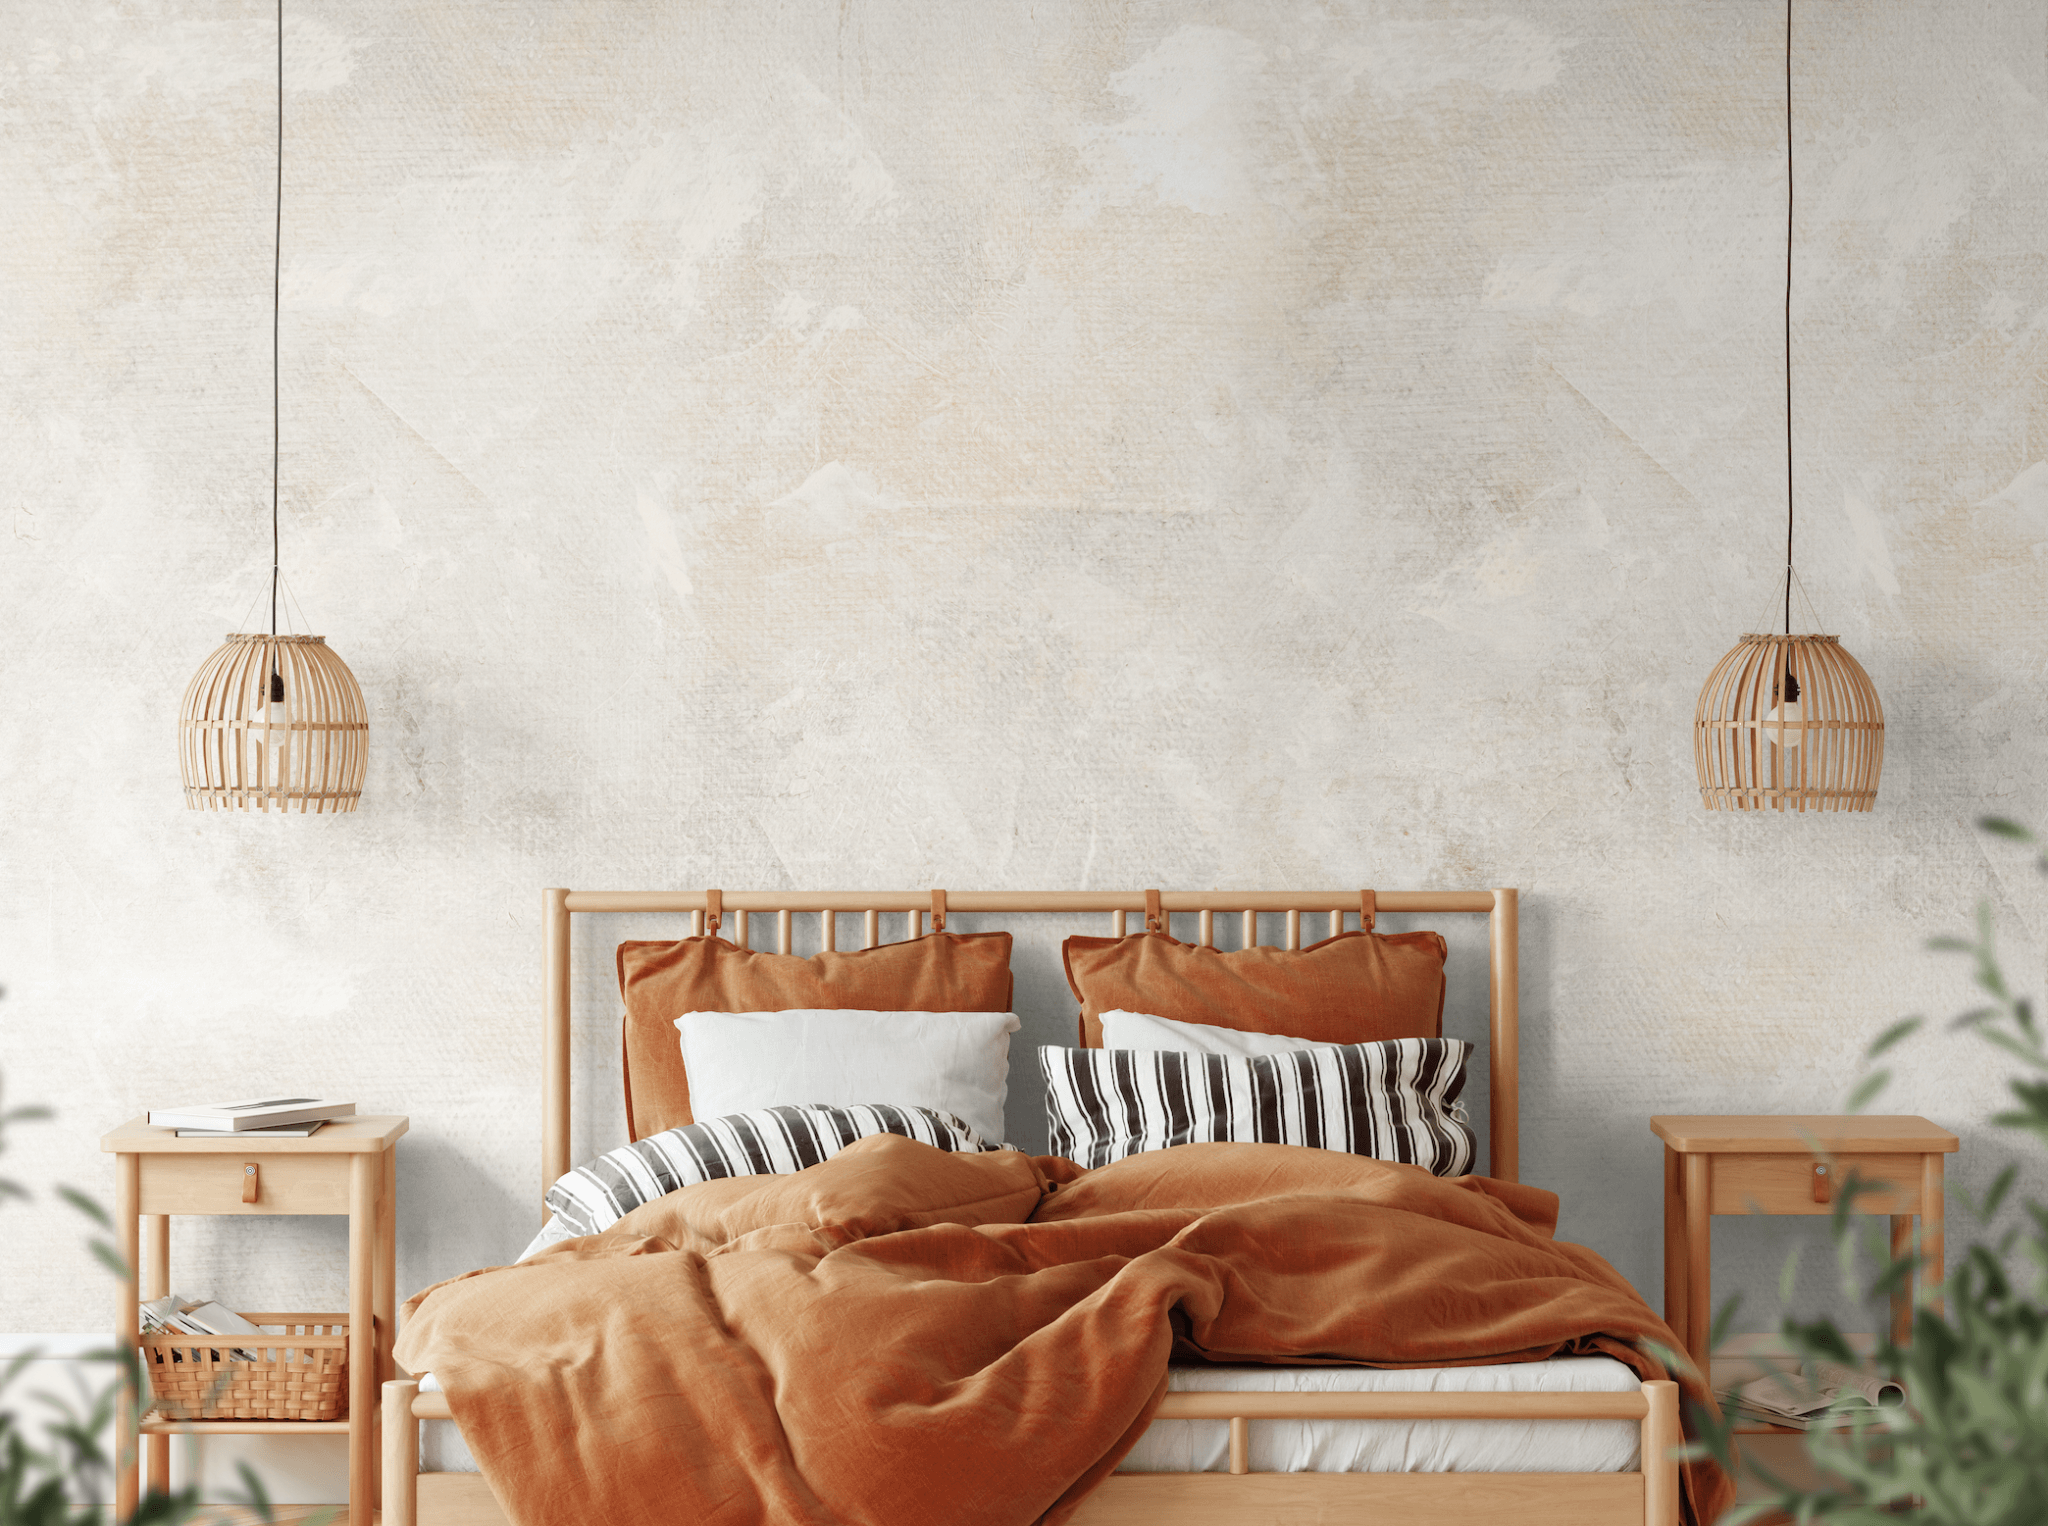 aesthetic wallpaper, textured peel and stick removable wallpaper